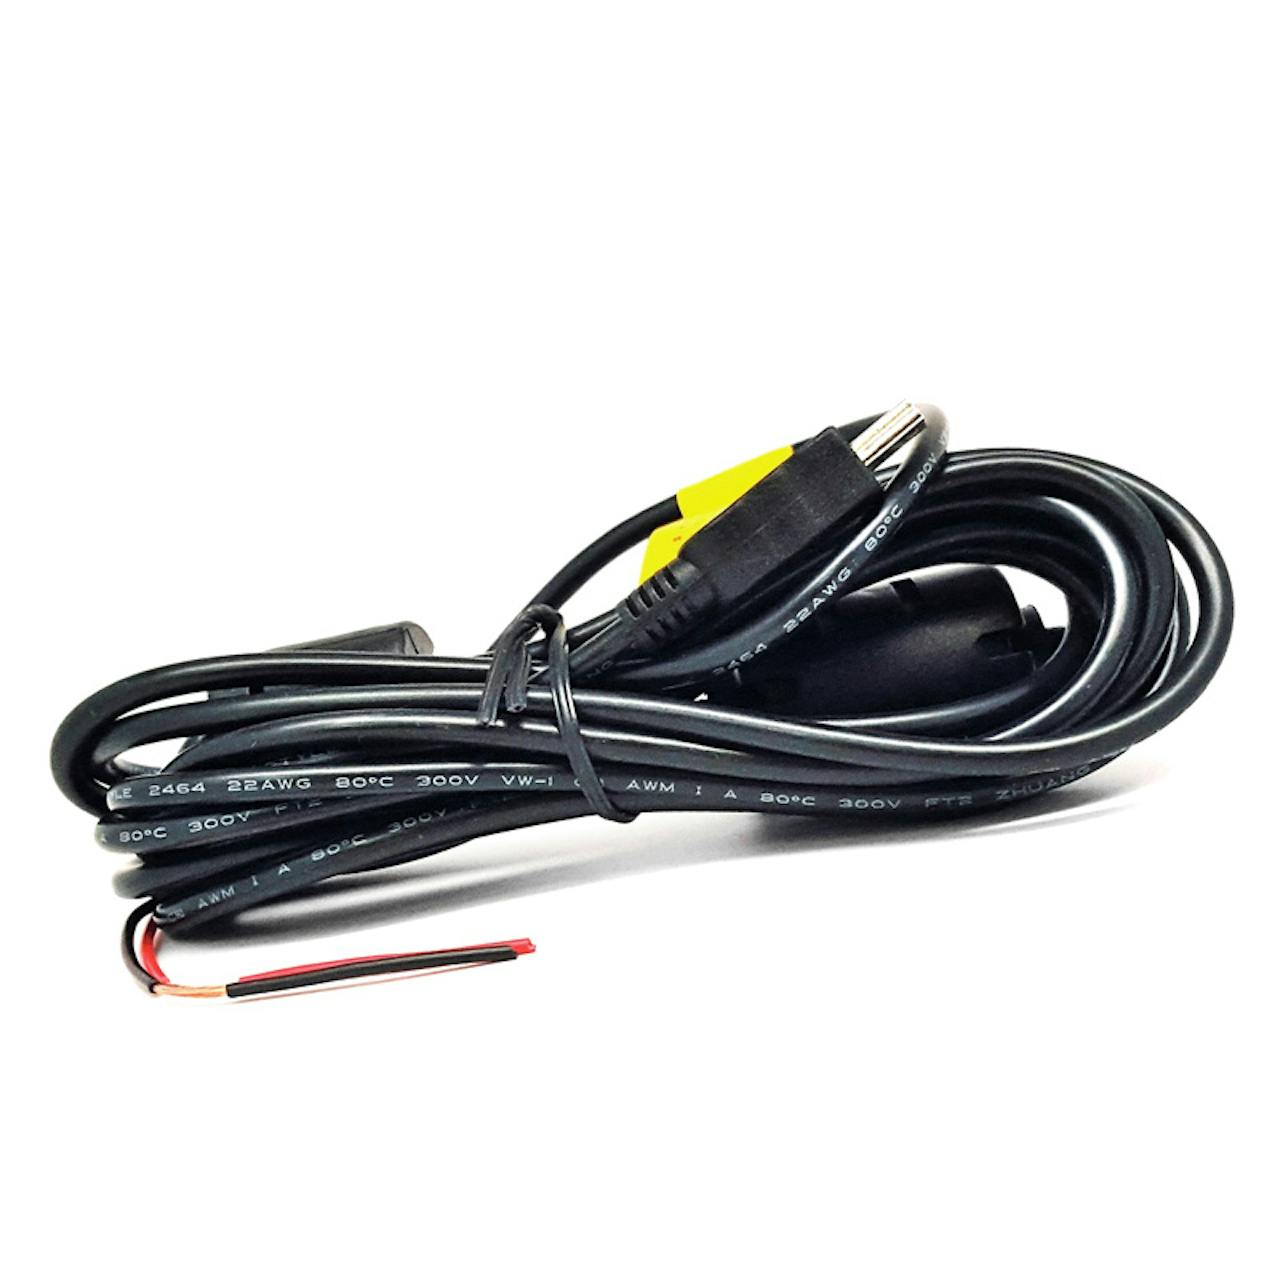 https://raneys-cdn11.imgix.net/images/stencil/original/products/196344/108346/12-Volt-Hard-Wire-Power-Cable-For-Dash-Cams-TDDVRCAM12VC__41871.1491407903.jpg?auto=compress,format&w=1280